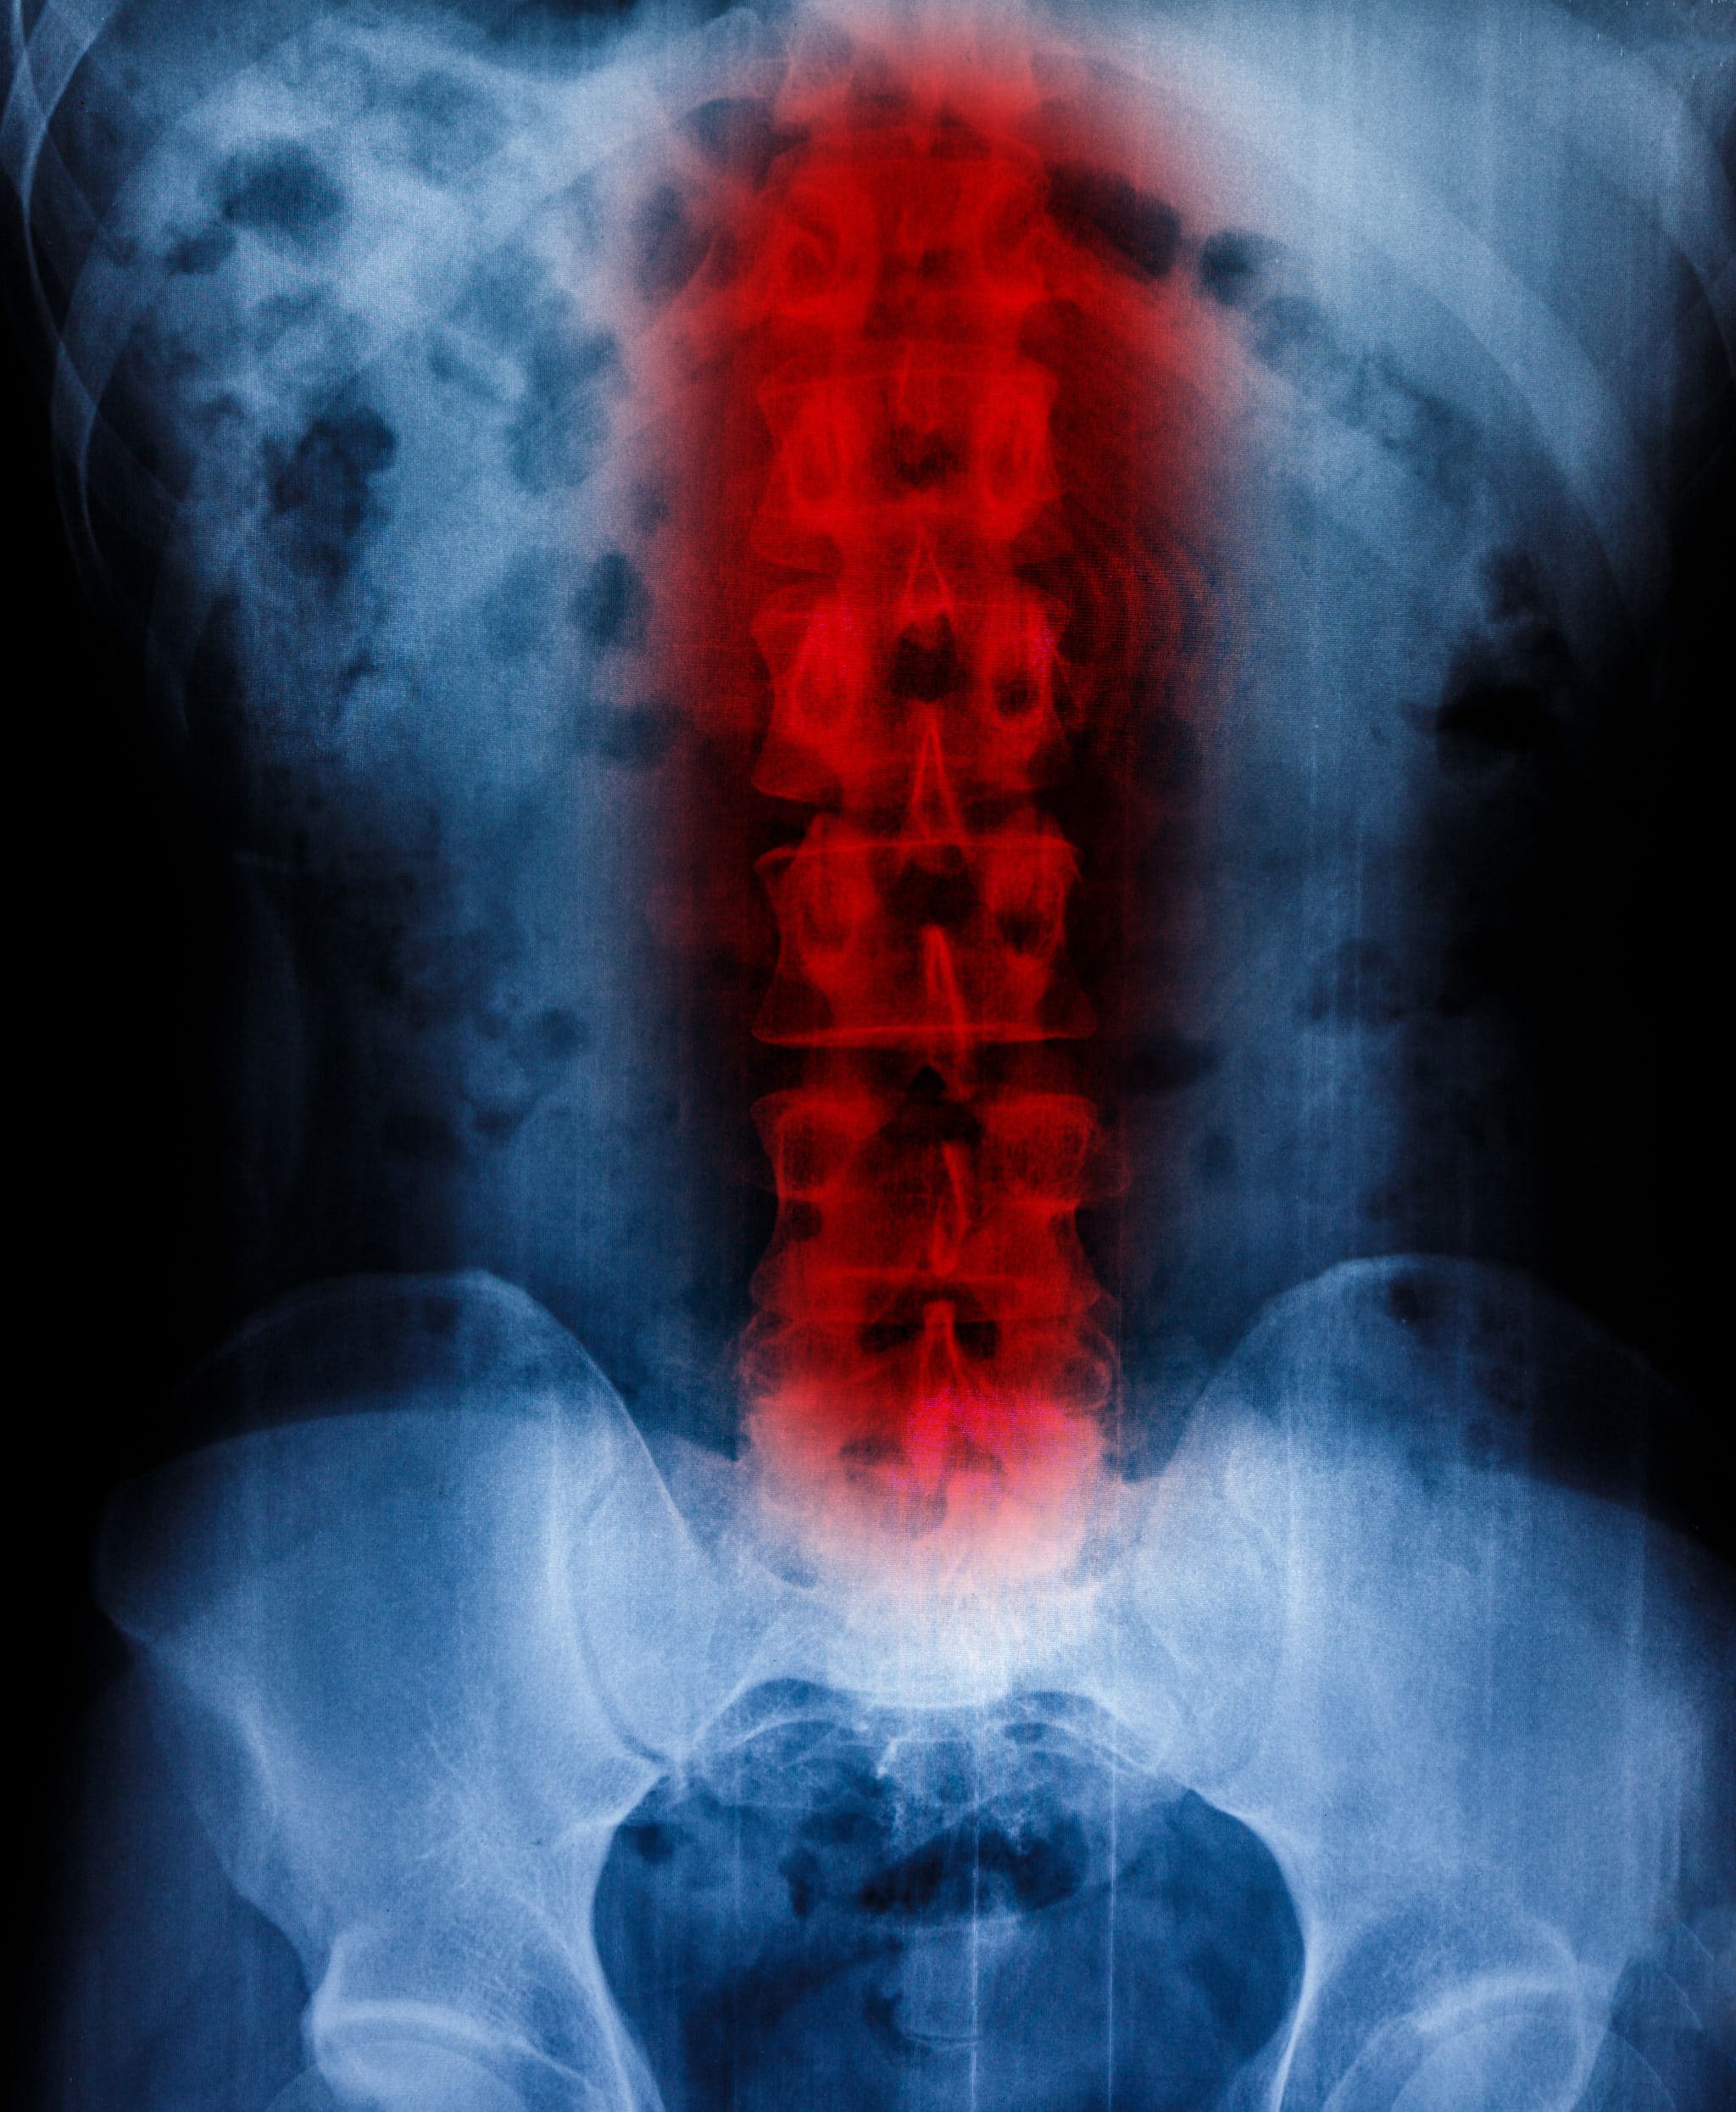 Dangers of Spinal Cord Injuries & How They Affect Quality of Life